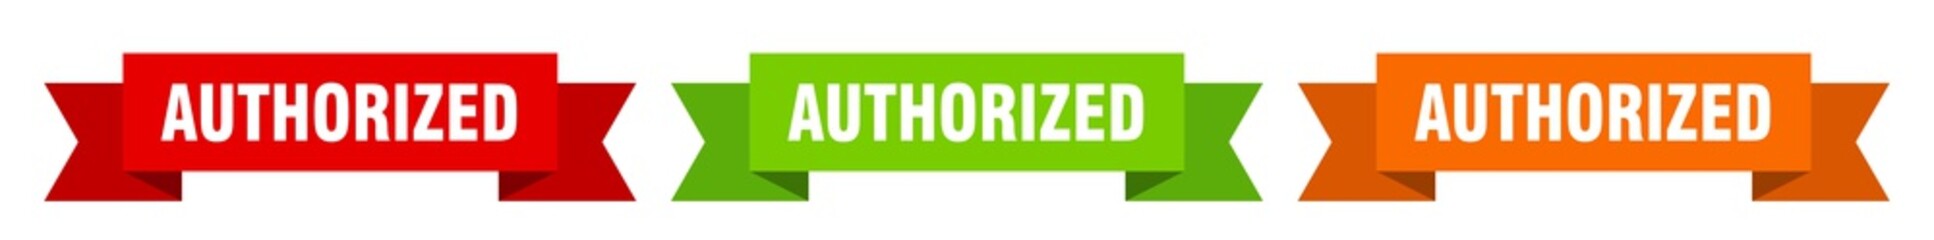 authorized ribbon. authorized isolated paper sign. banner